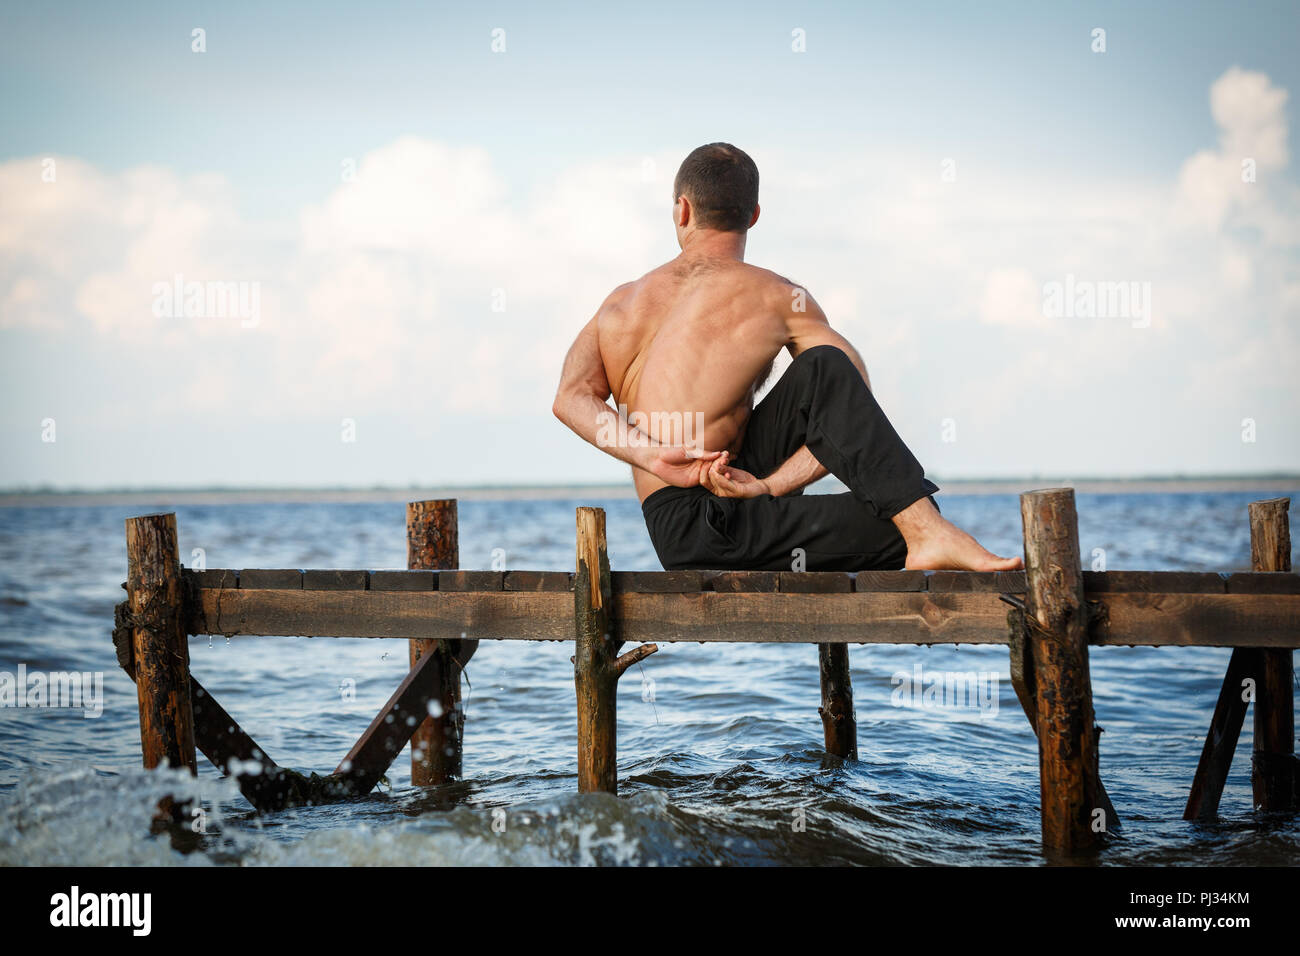 Young yoga trainer practicing ardha matsyendrasana or lord of the fishes pose on a wooden pier on a sea or river shore. Healthy lifestyle concept Stock Photo